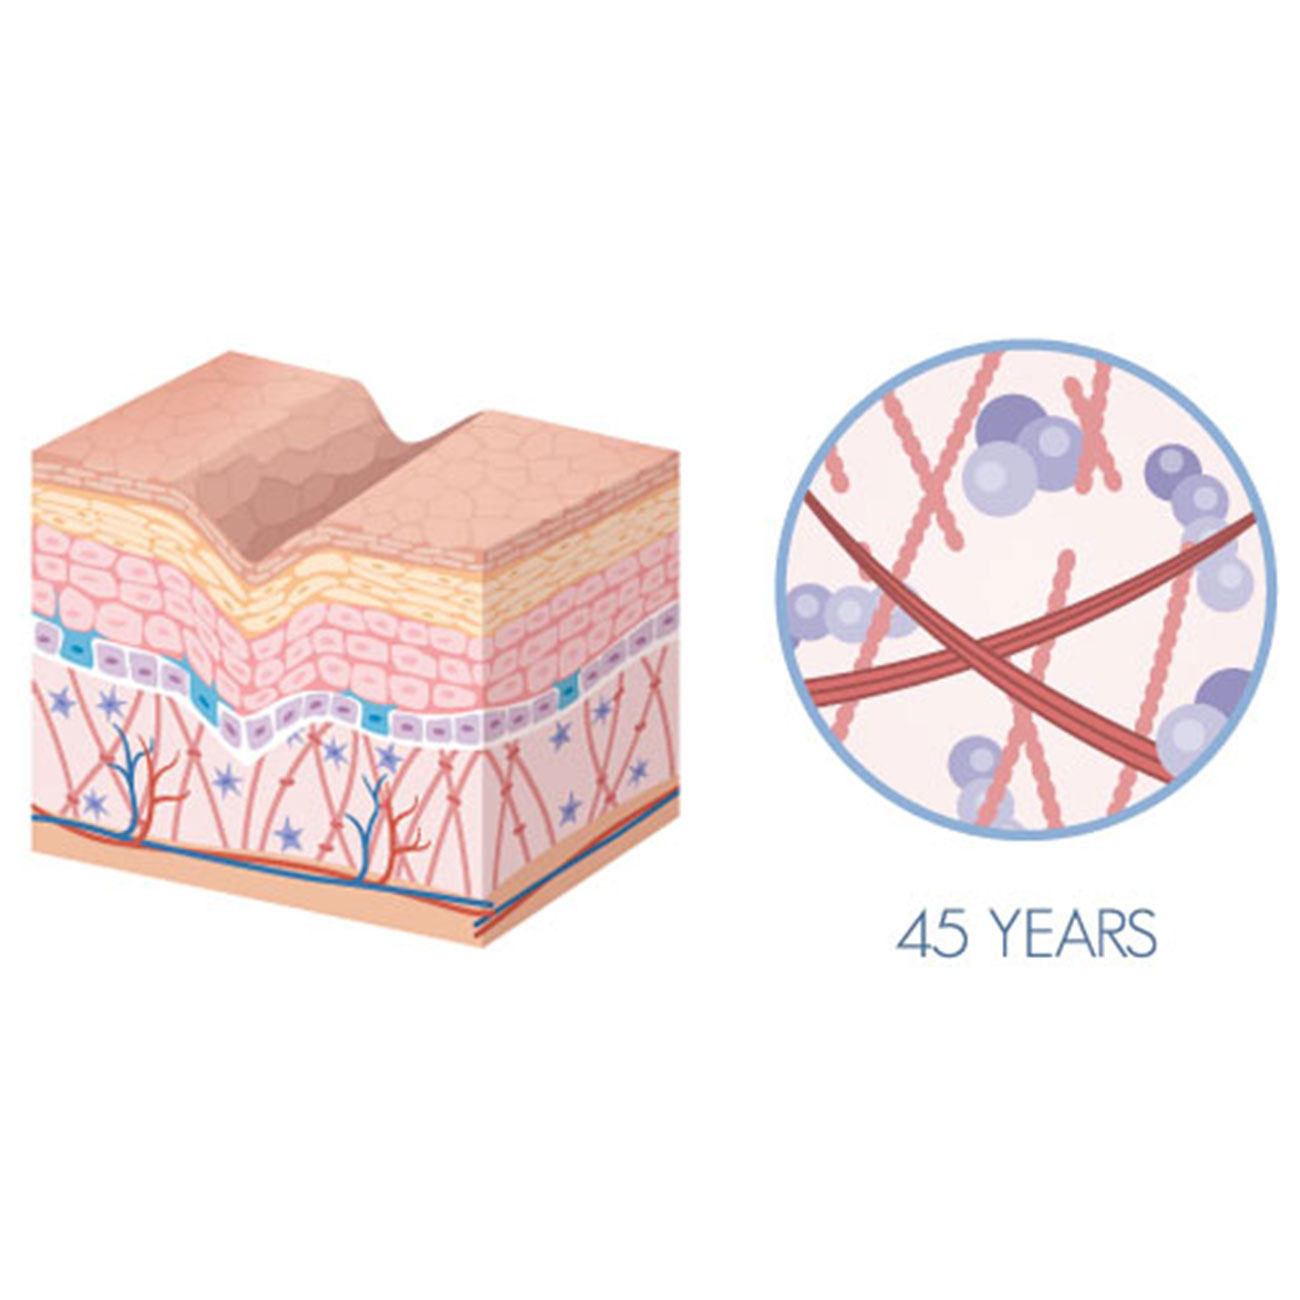 Skin appearance and collagen level diagram - after 40